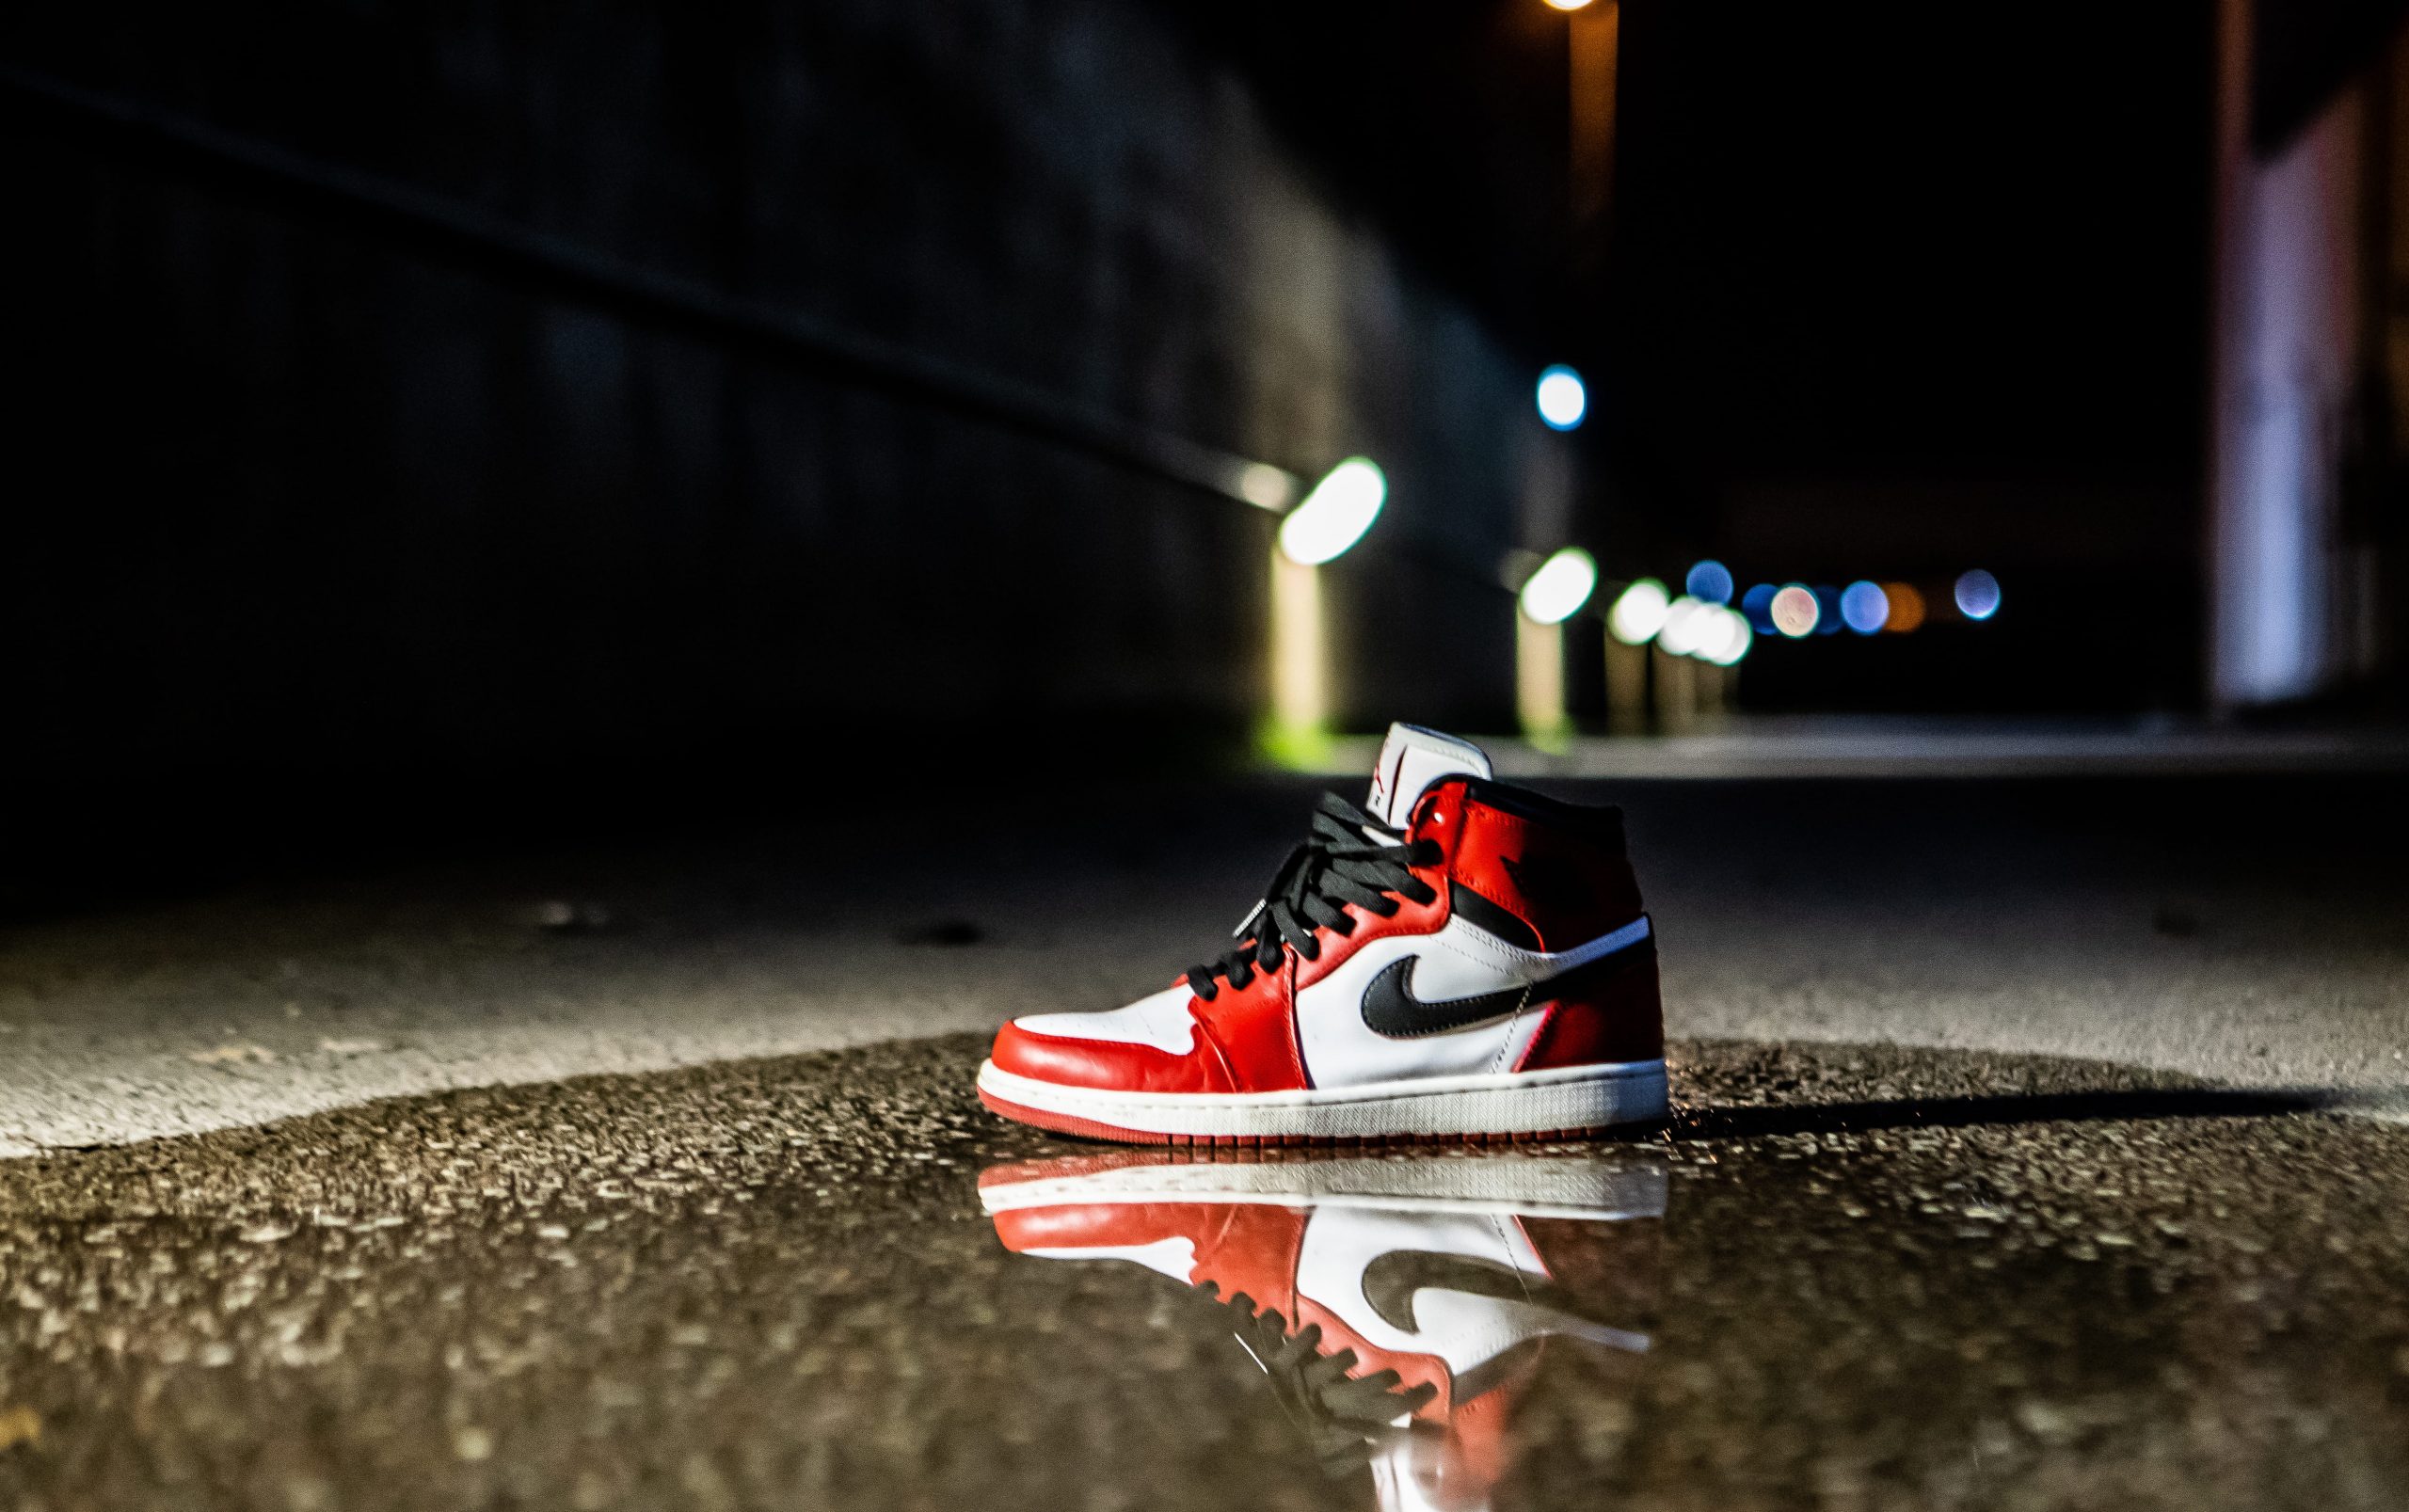 Wallpaper red and white Air Jordan 1 shoe on concrete floor, apparel, clothing